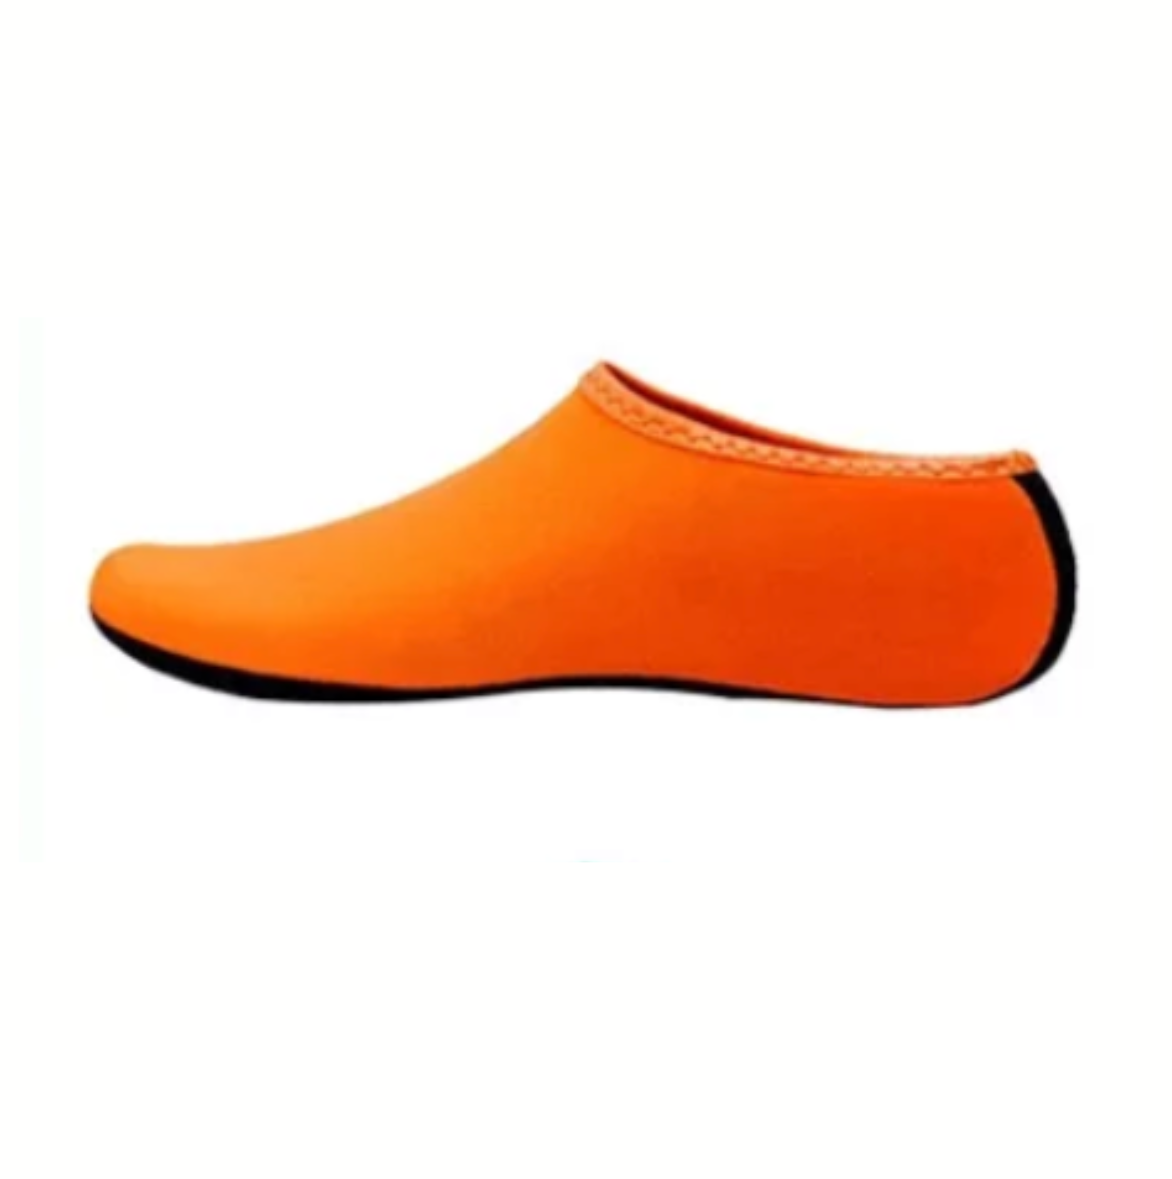 Unisex Water Shoes from Pollys Boutique